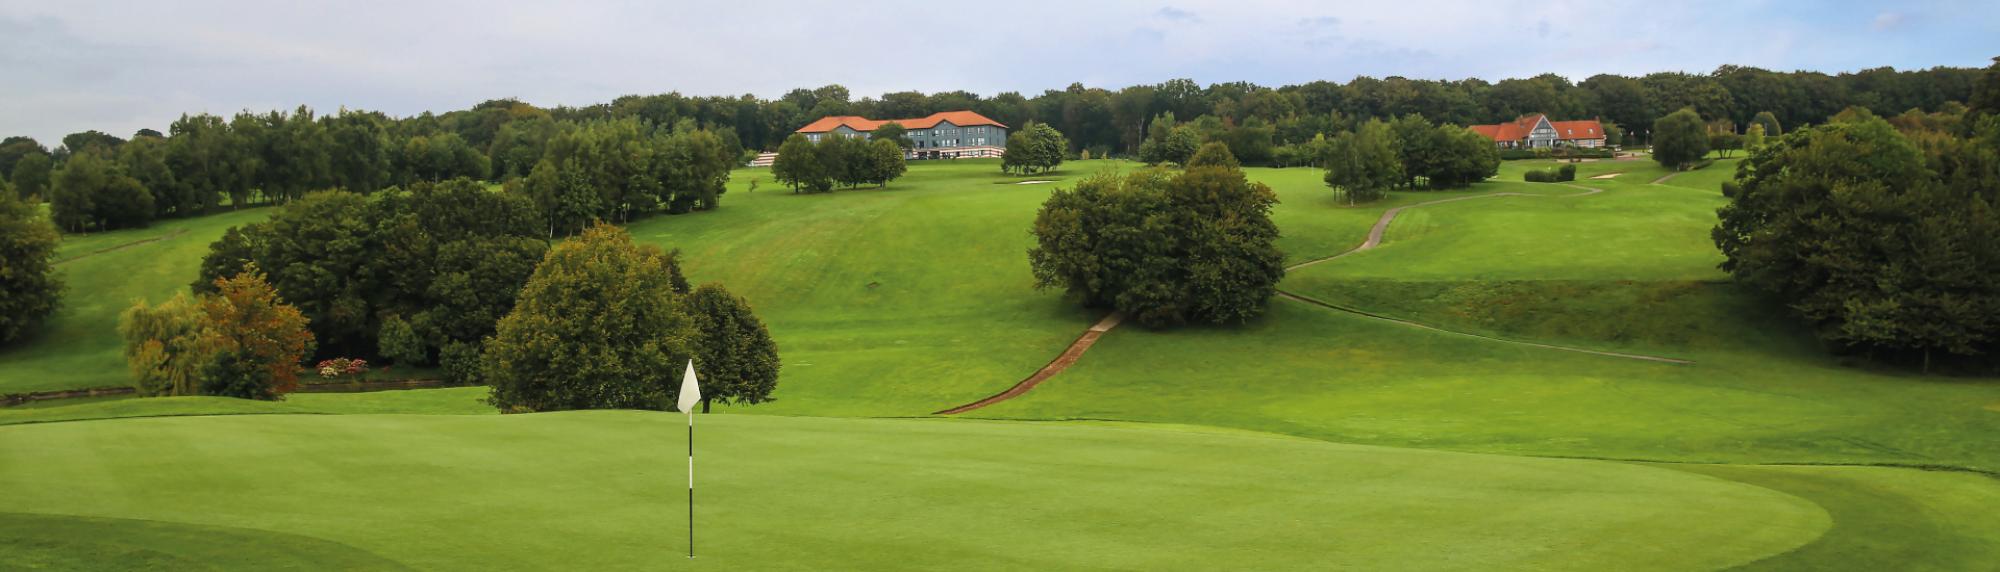 Saint-Omer Golf carries several of the best golf course around Northern France